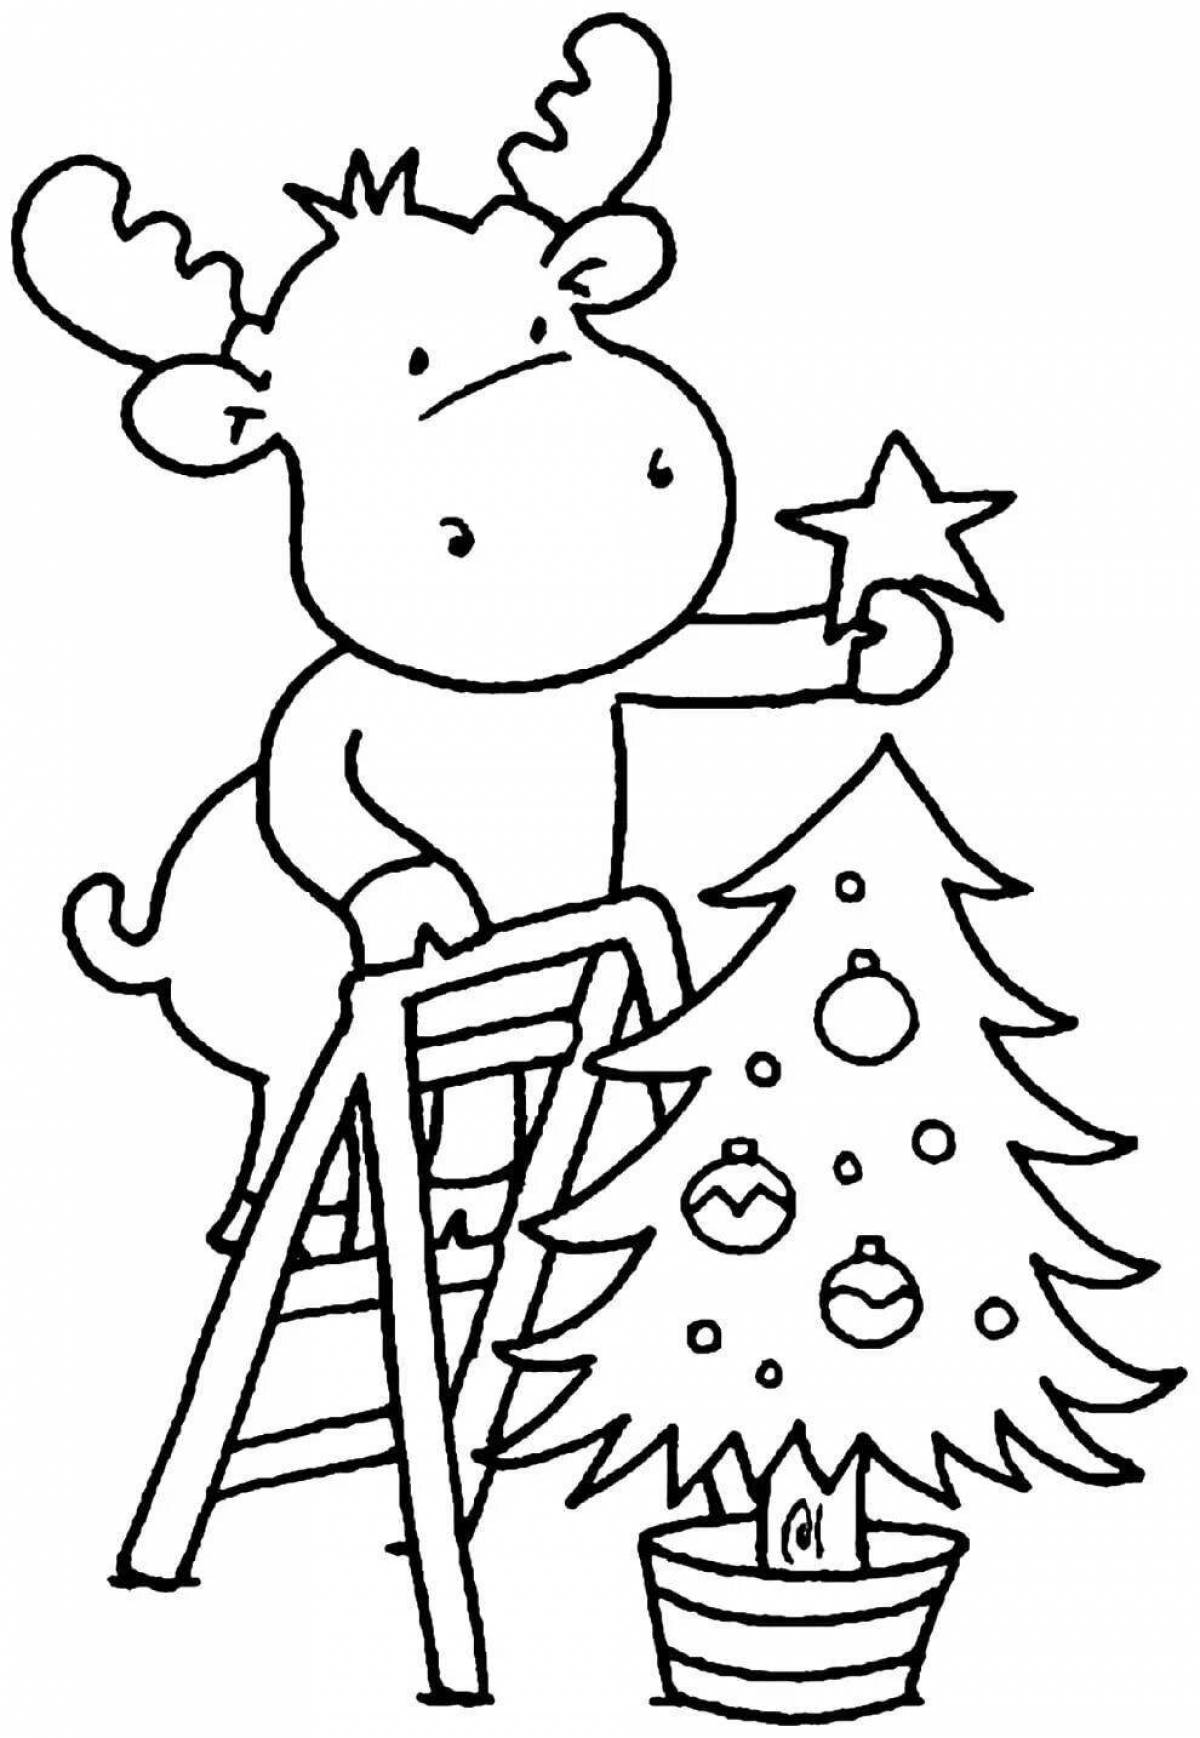 Funny Christmas coloring book